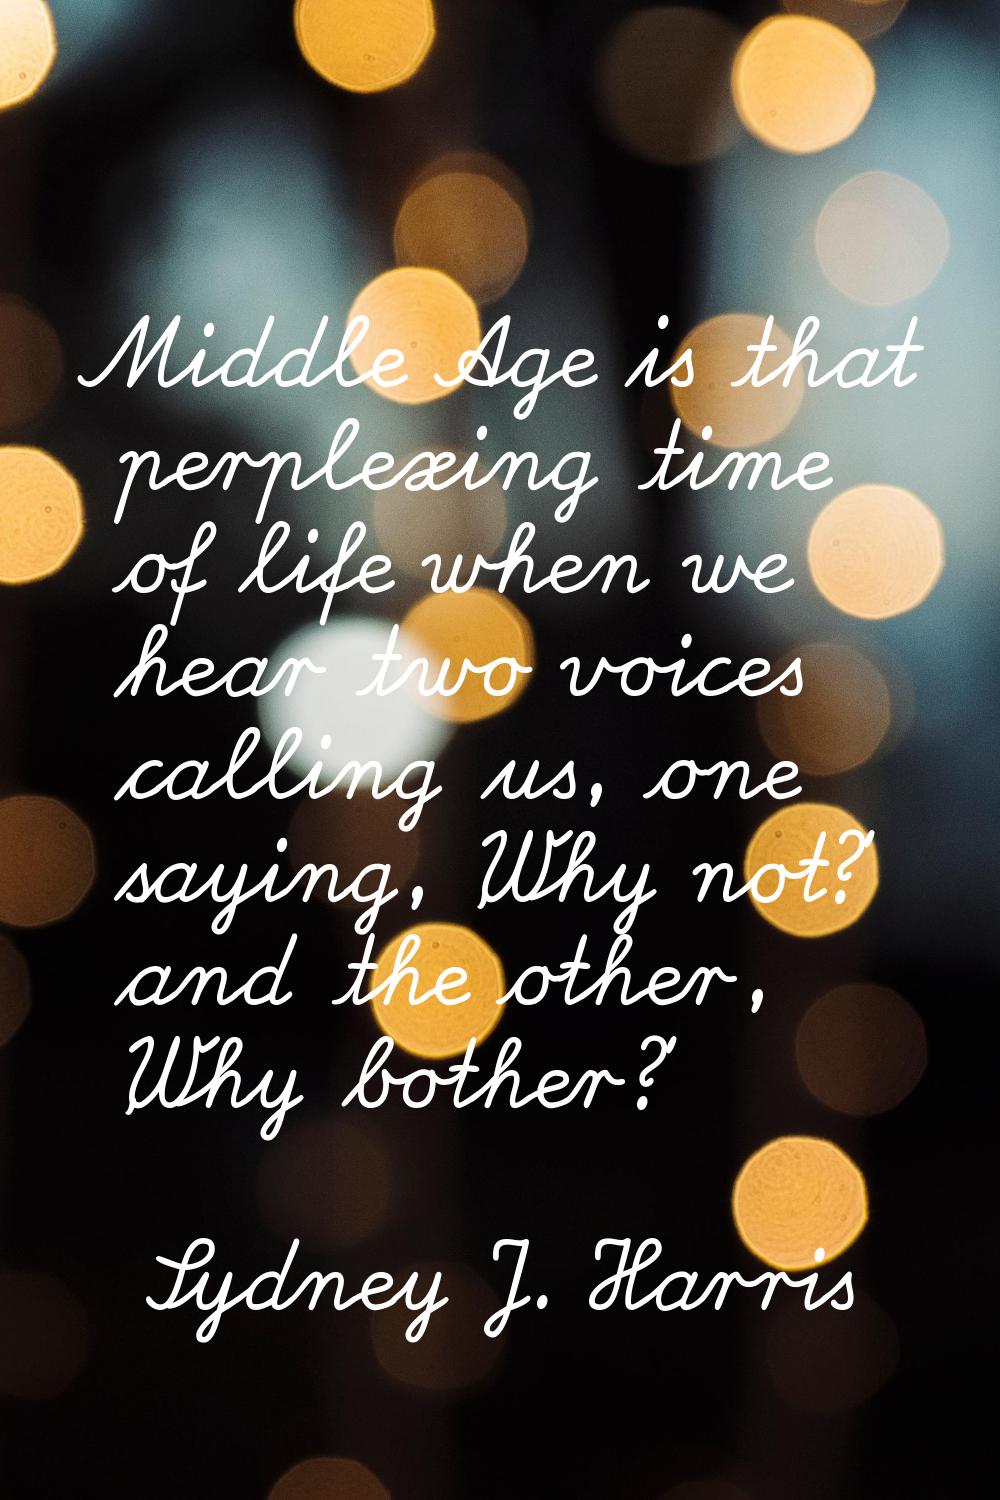 Middle Age is that perplexing time of life when we hear two voices calling us, one saying, 'Why not